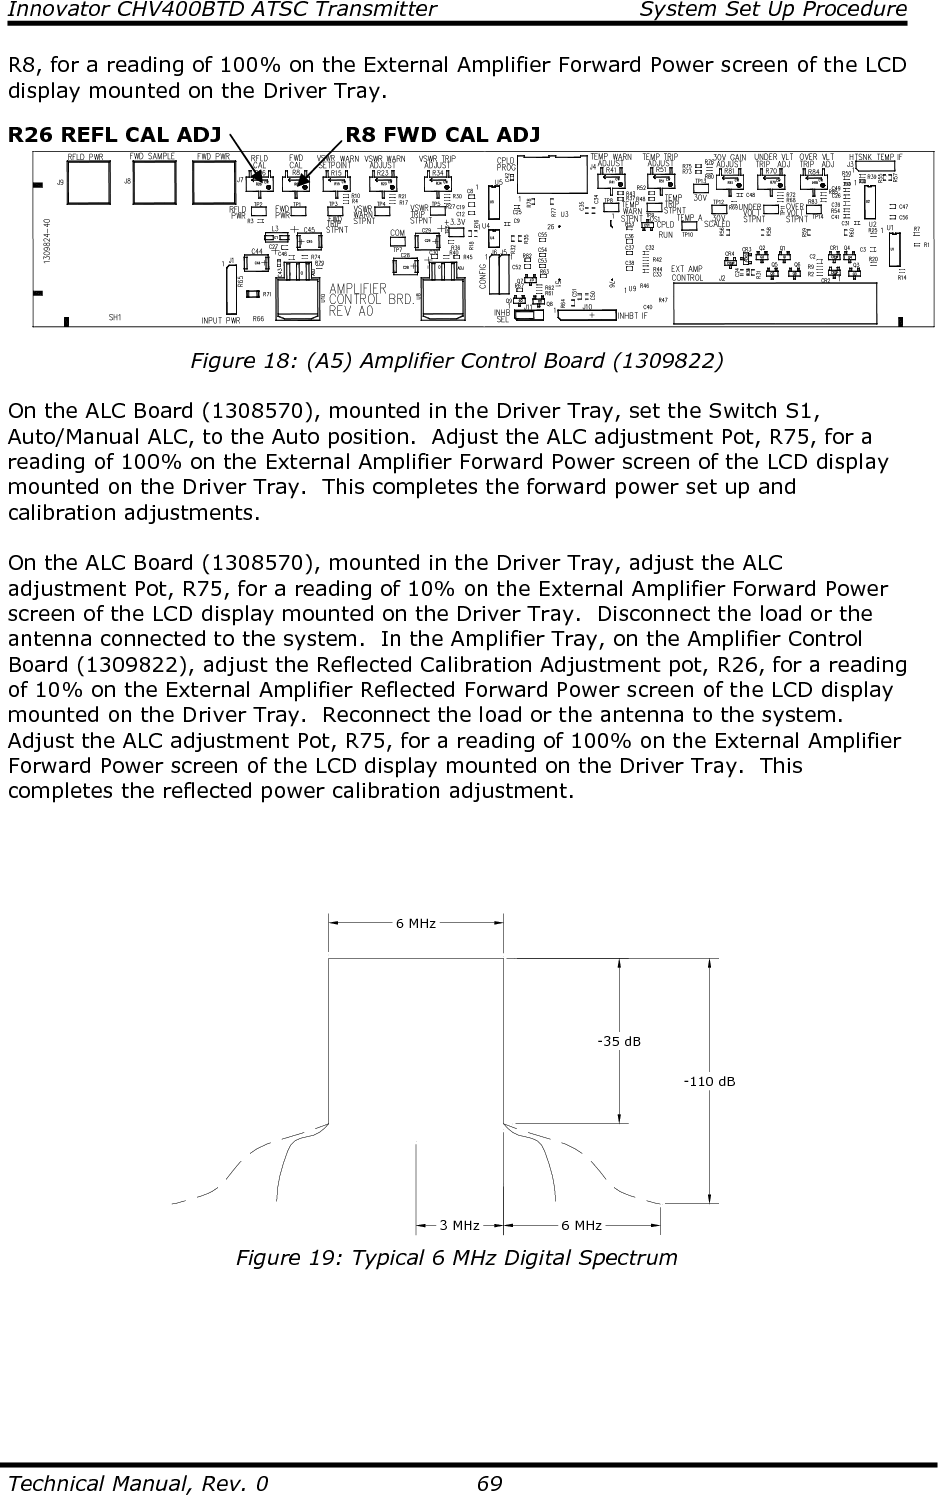 Innovator CHV400BTD ATSC Transmitter  System Set Up Procedure  Technical Manual, Rev. 0    69 R8, for a reading of 100% on the External Amplifier Forward Power screen of the LCD display mounted on the Driver Tray.   Figure 18: (A5) Amplifier Control Board (1309822)  On the ALC Board (1308570), mounted in the Driver Tray, set the Switch S1, Auto/Manual ALC, to the Auto position.  Adjust the ALC adjustment Pot, R75, for a reading of 100% on the External Amplifier Forward Power screen of the LCD display mounted on the Driver Tray.  This completes the forward power set up and calibration adjustments.  On the ALC Board (1308570), mounted in the Driver Tray, adjust the ALC adjustment Pot, R75, for a reading of 10% on the External Amplifier Forward Power screen of the LCD display mounted on the Driver Tray.  Disconnect the load or the antenna connected to the system.  In the Amplifier Tray, on the Amplifier Control Board (1309822), adjust the Reflected Calibration Adjustment pot, R26, for a reading of 10% on the External Amplifier Reflected Forward Power screen of the LCD display mounted on the Driver Tray.  Reconnect the load or the antenna to the system.  Adjust the ALC adjustment Pot, R75, for a reading of 100% on the External Amplifier Forward Power screen of the LCD display mounted on the Driver Tray.  This completes the reflected power calibration adjustment.     6 MHz-35 dB-110 dB3 MHz 6 MHz Figure 19: Typical 6 MHz Digital Spectrum   R8 FWD CAL ADJ R26 REFL CAL ADJ 